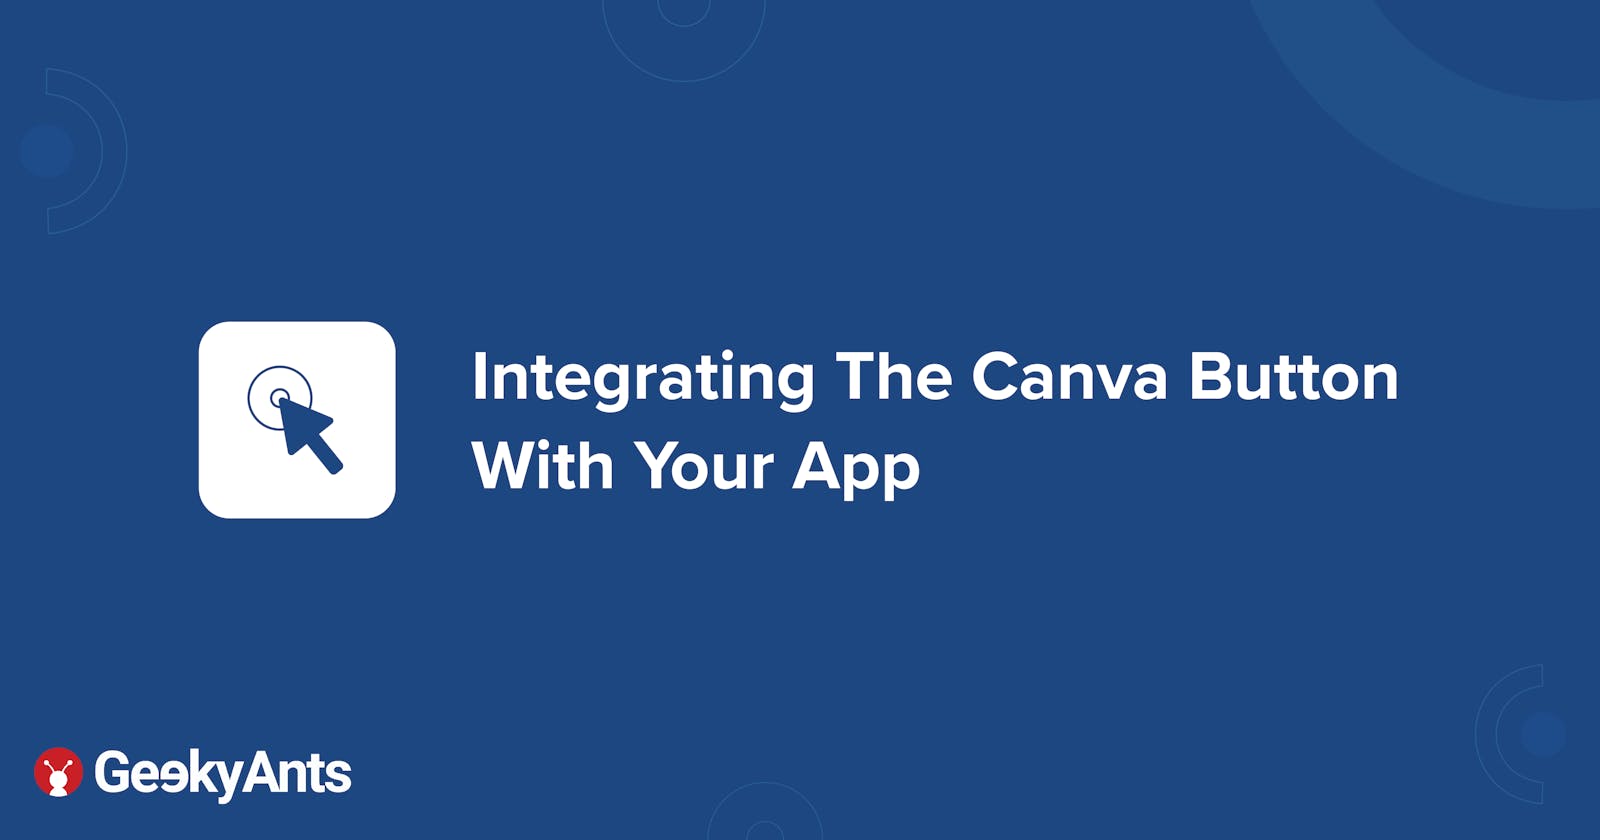 Integrating The Canva Button With Your App